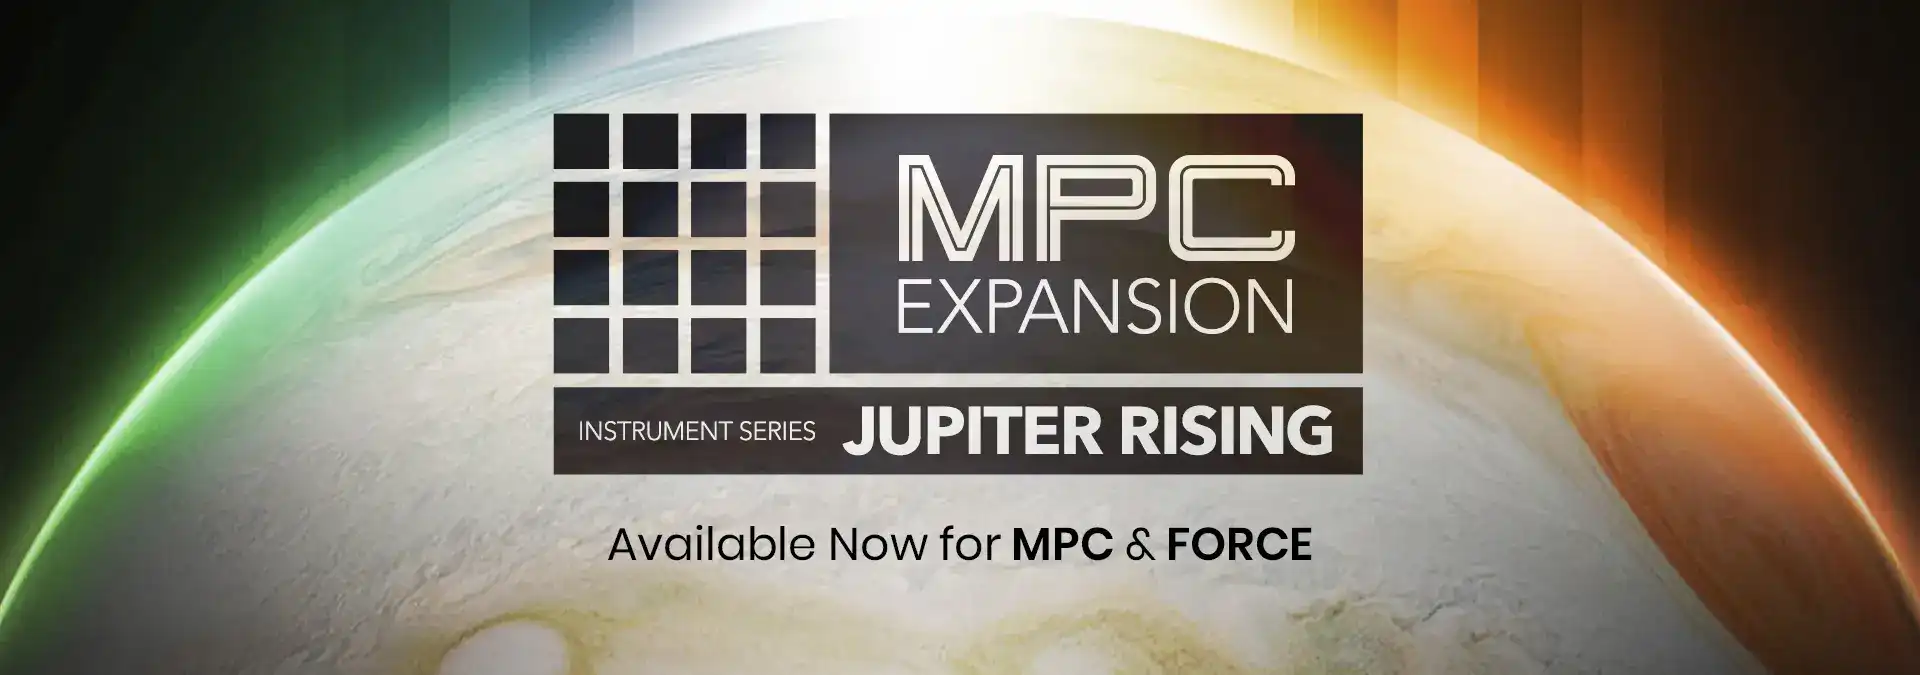 mpc expansion instrument series jupiter rising available now for mpc & force